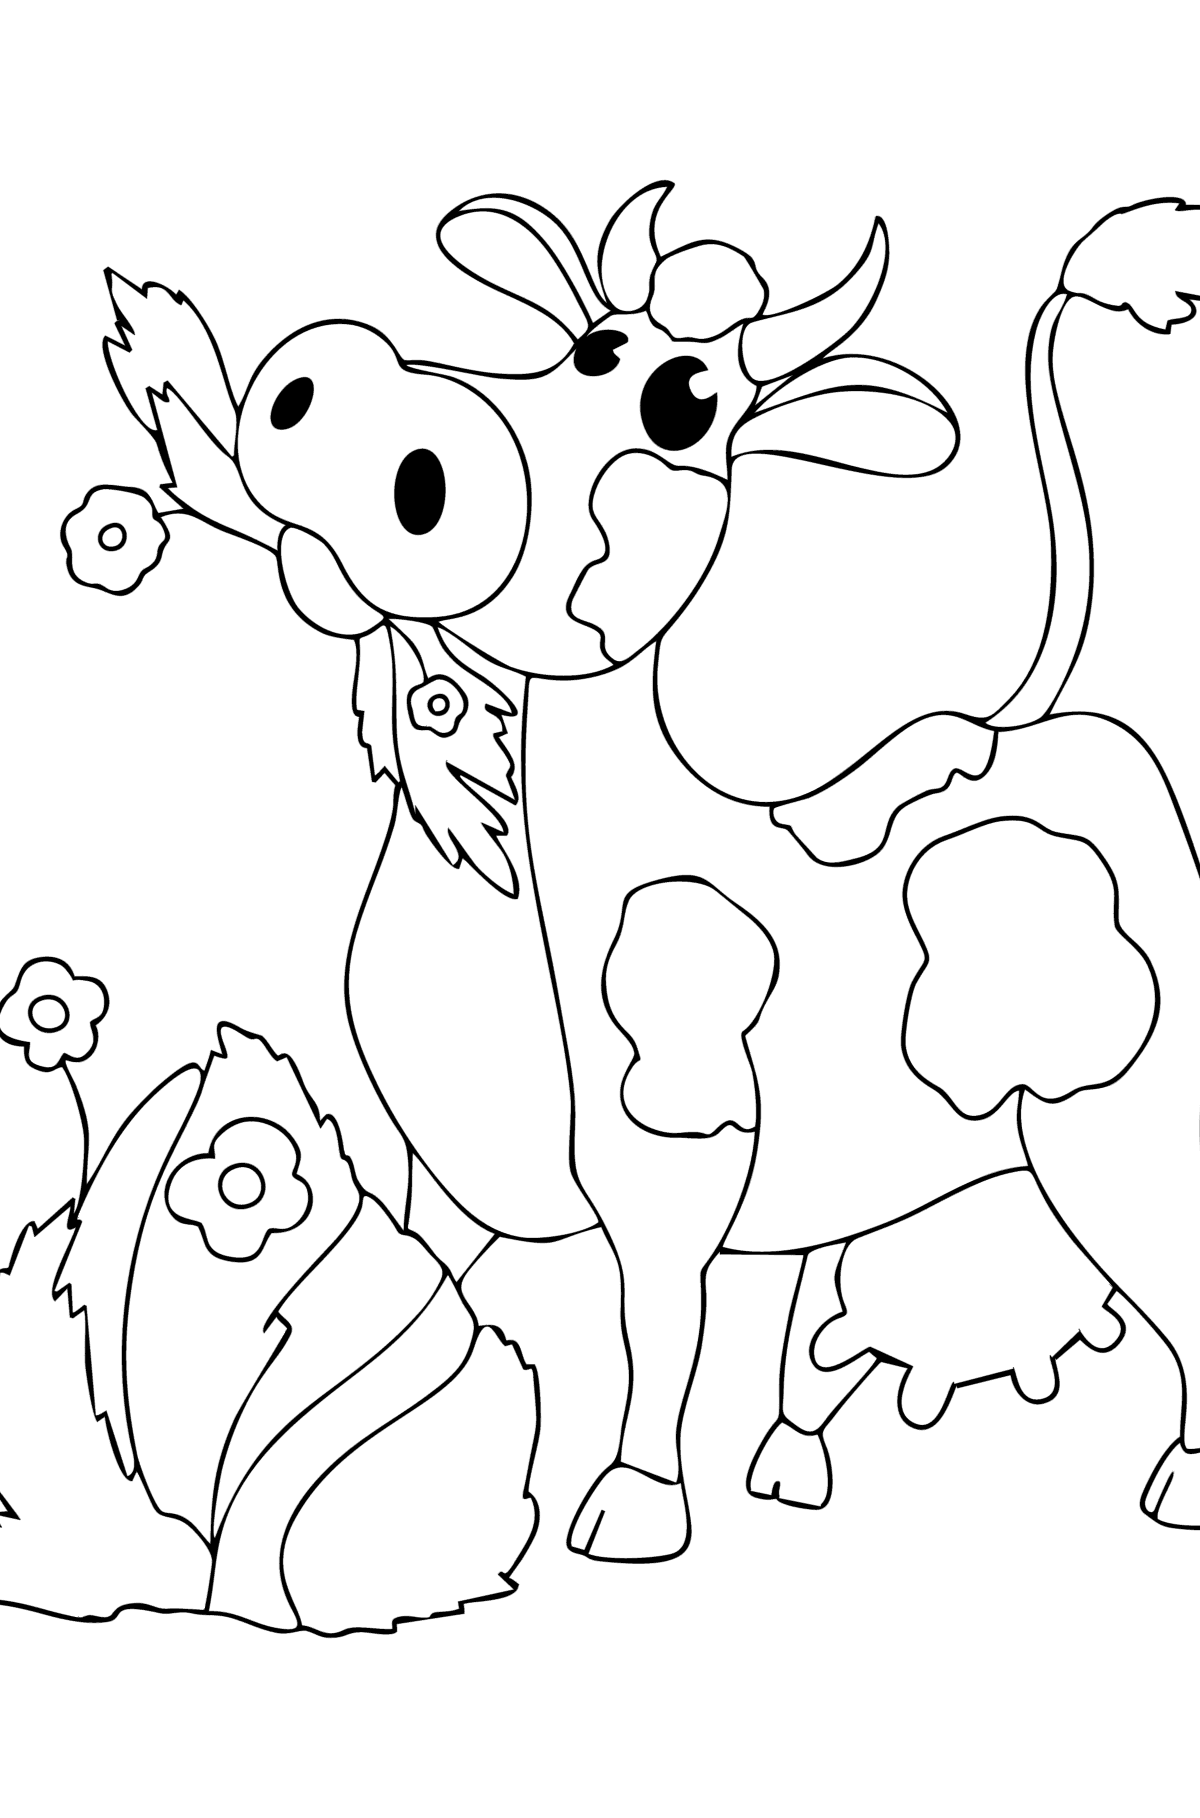 Coloring page Cow with hay - Coloring Pages for Kids